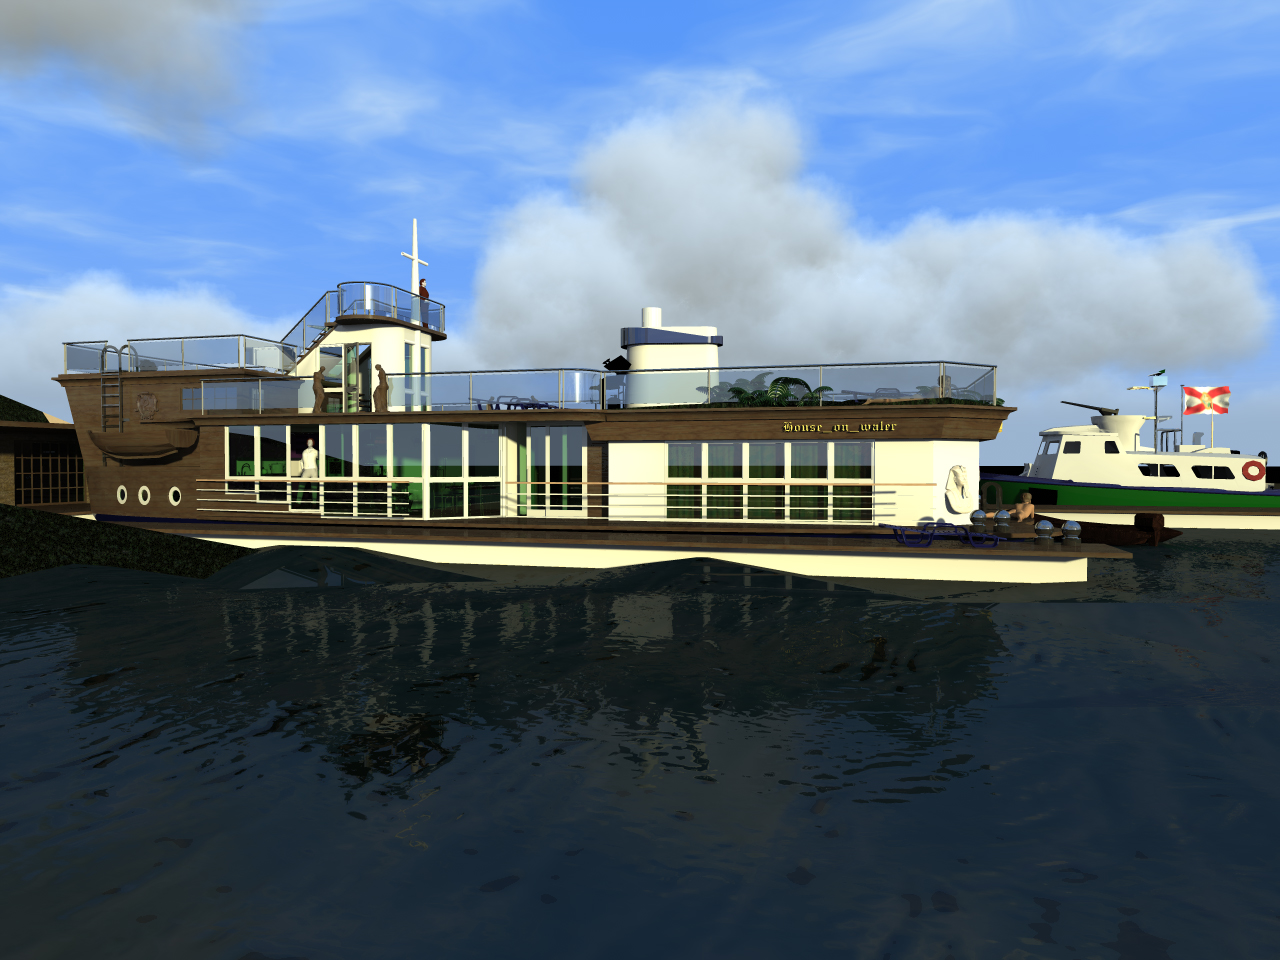 House on water